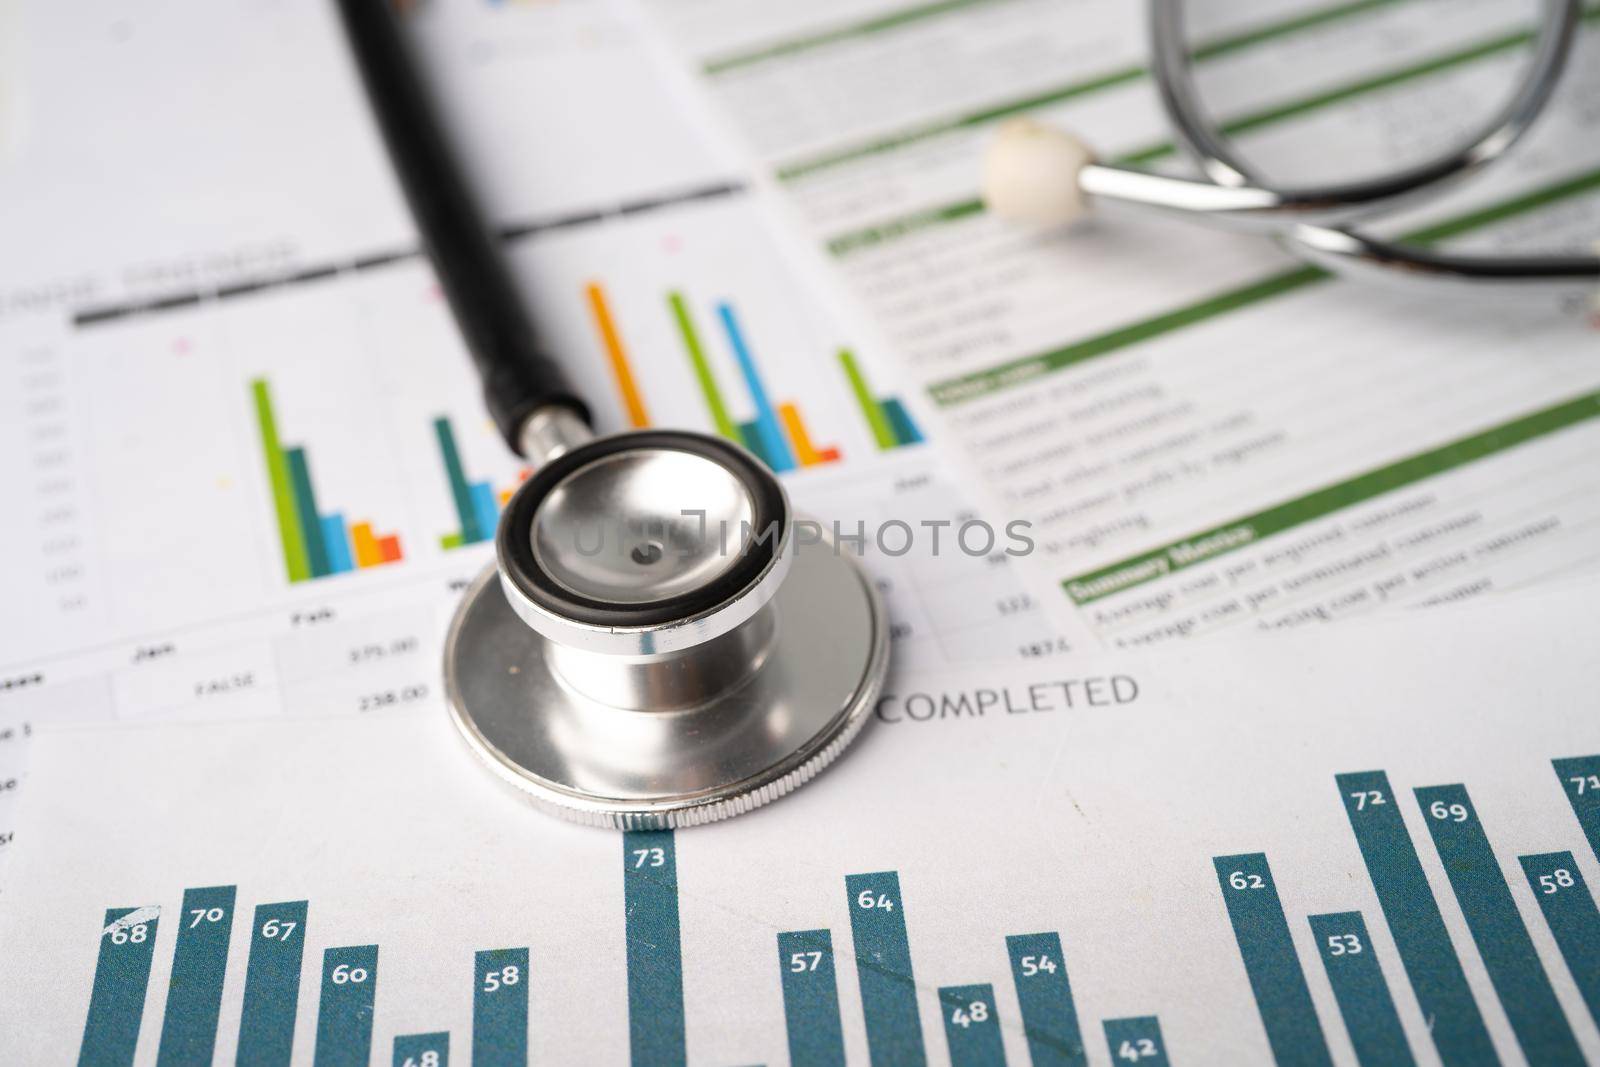 Stethoscope on charts and graphs paper, Finance, Account, Statistics, Investment, Analytic research data economy and Business company concept. by pamai